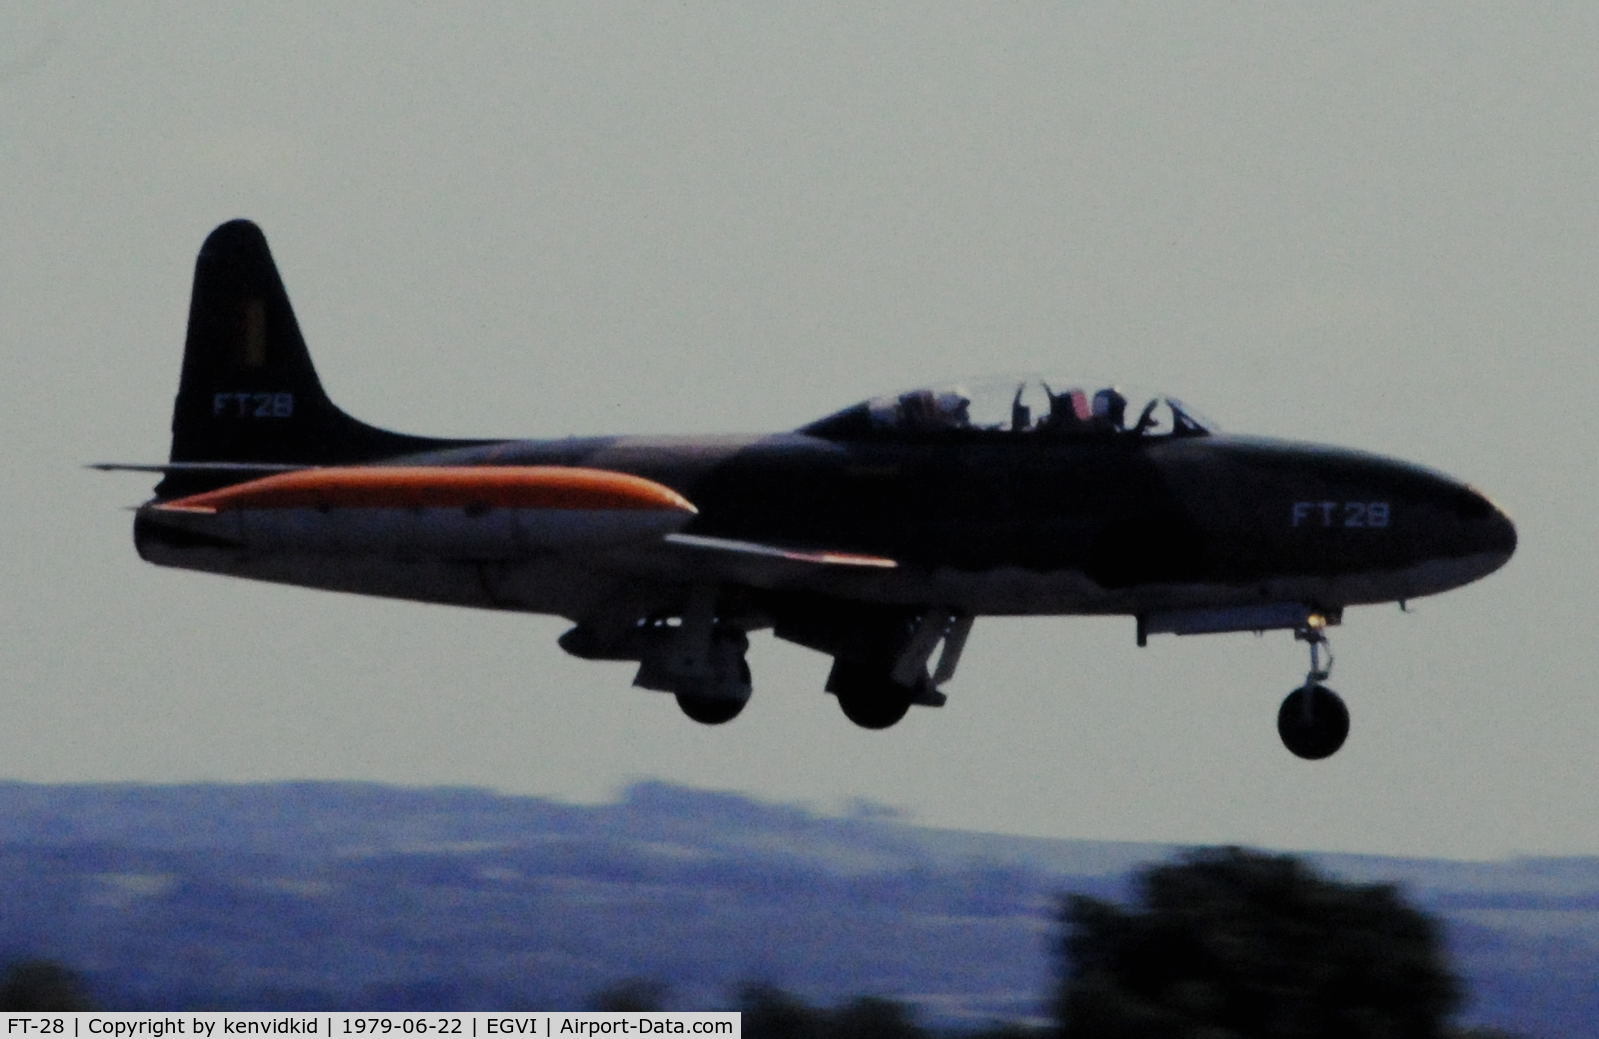 FT-28, Lockheed T-33A Shooting Star C/N 580-9091, At the 1979 International Air Tattoo Greenham Common, copied from slide